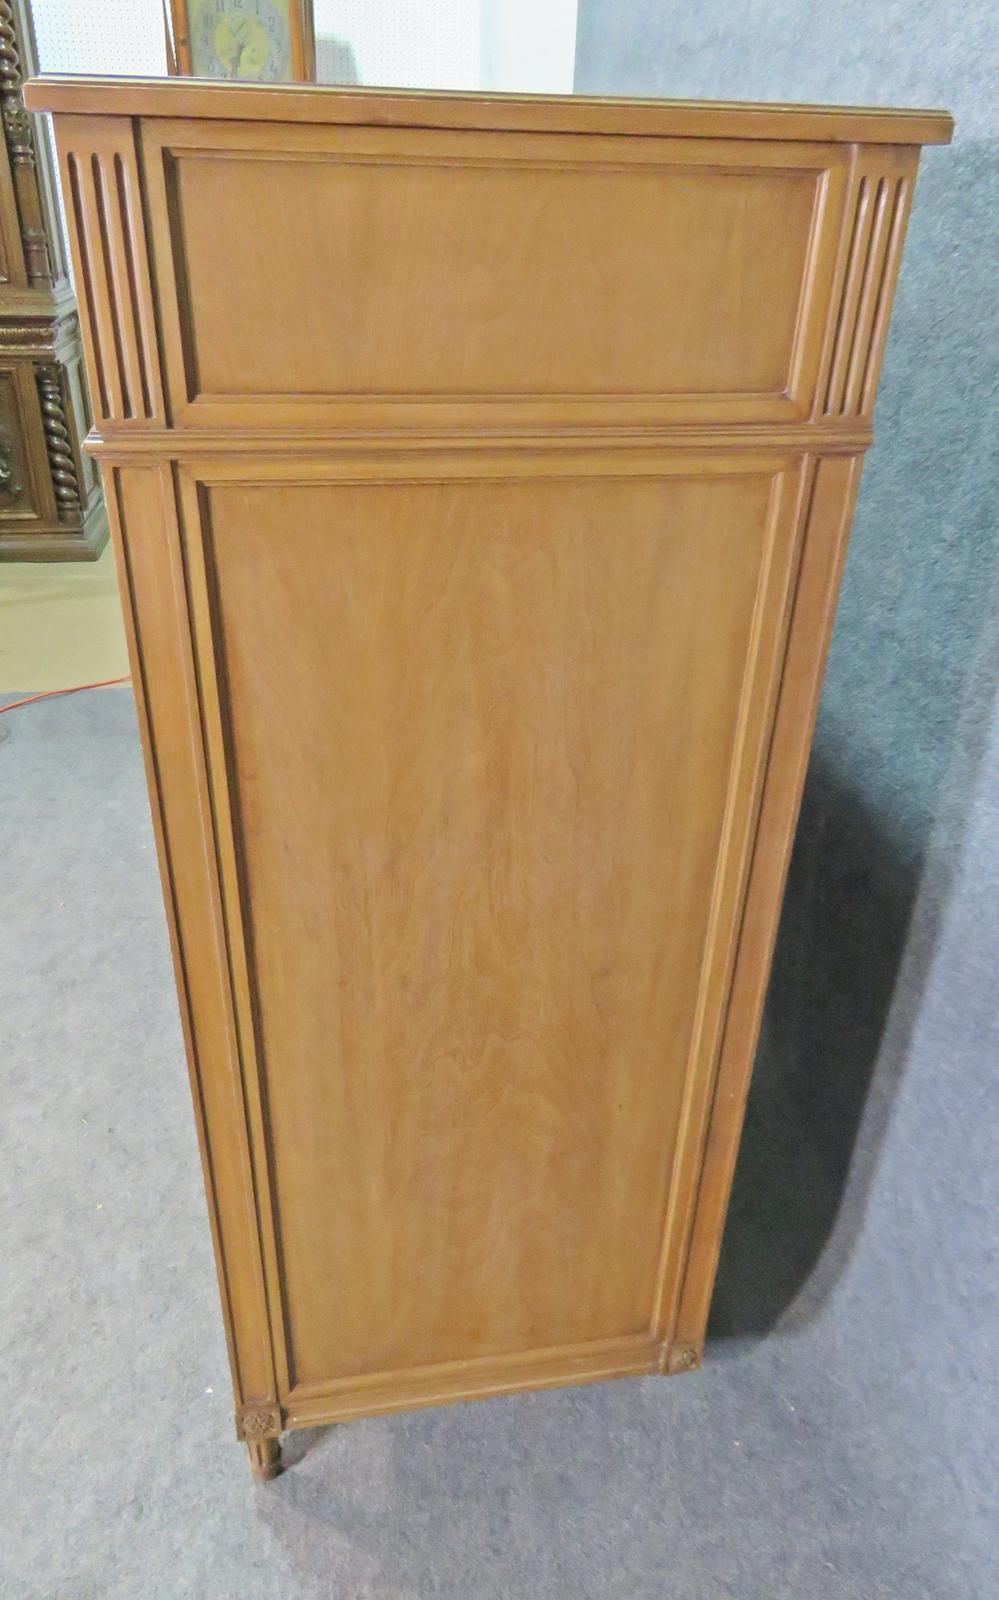 Maison Jansen Style Tall Chest of Drawers 1 of 2 Similar Chests 1